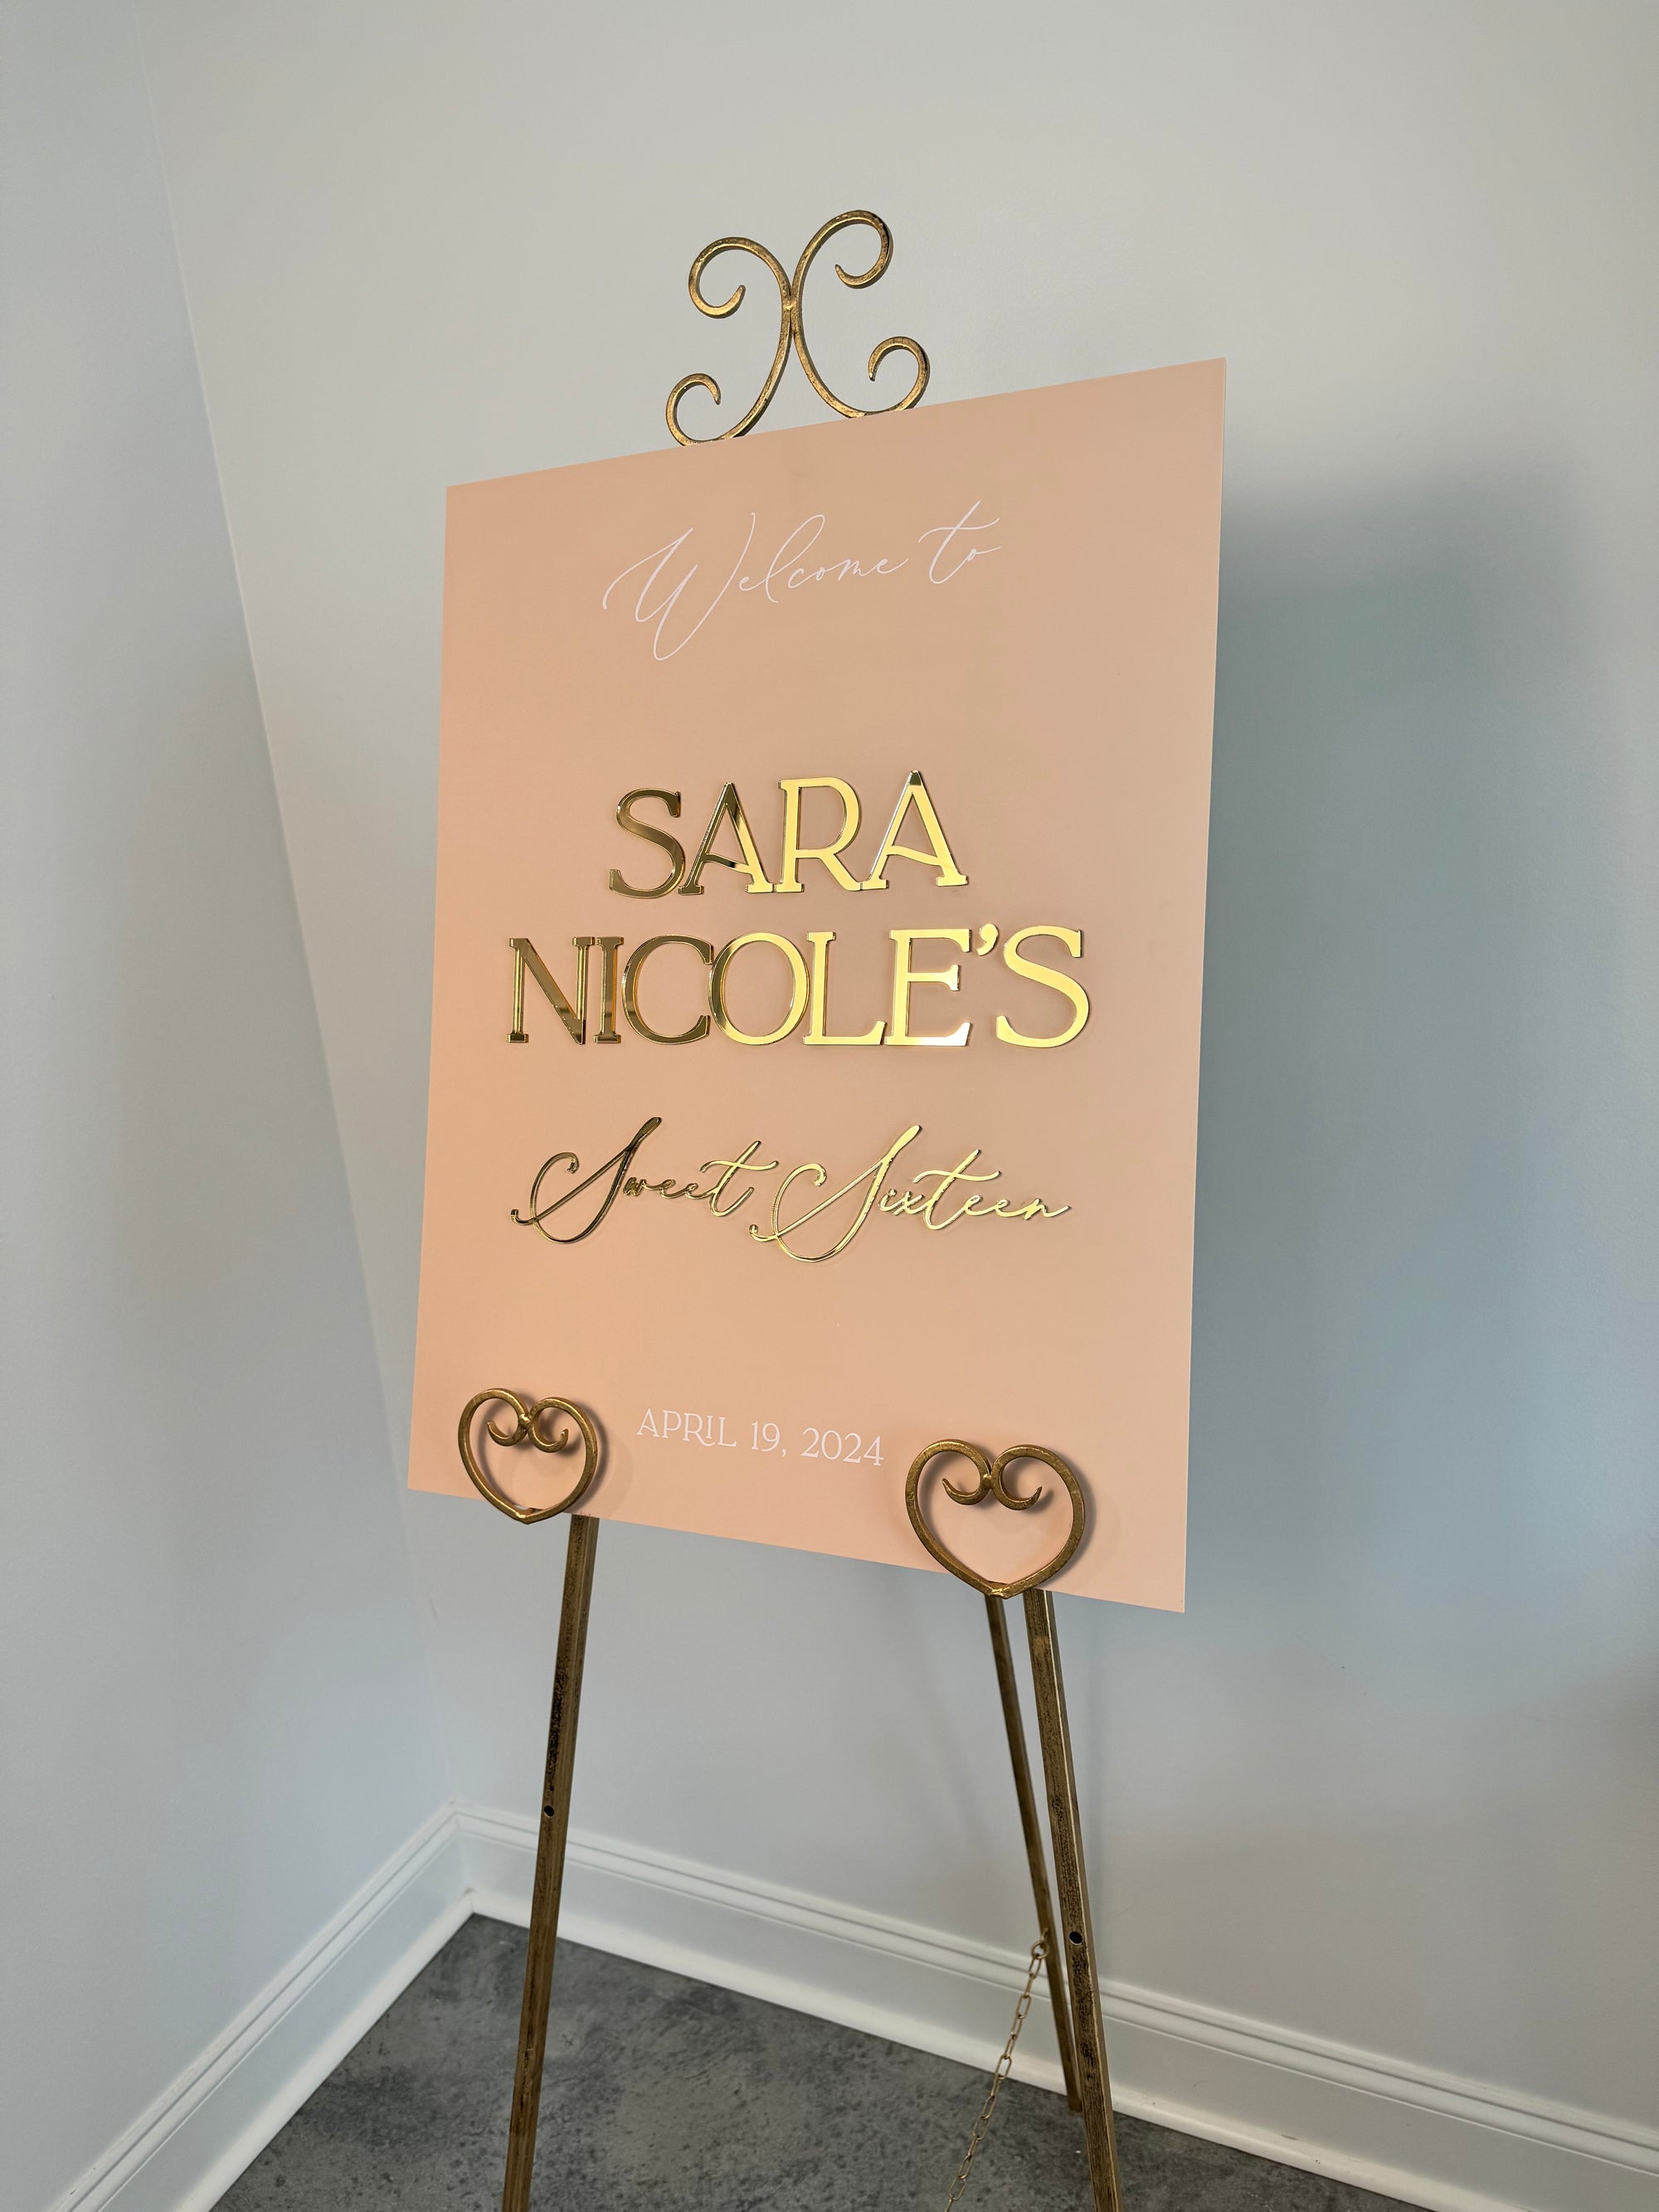 3D Event Entry Signs with Laser Cut Wording - Sign Sizes 18"x24" or 24"x36" (4 laser cut words)